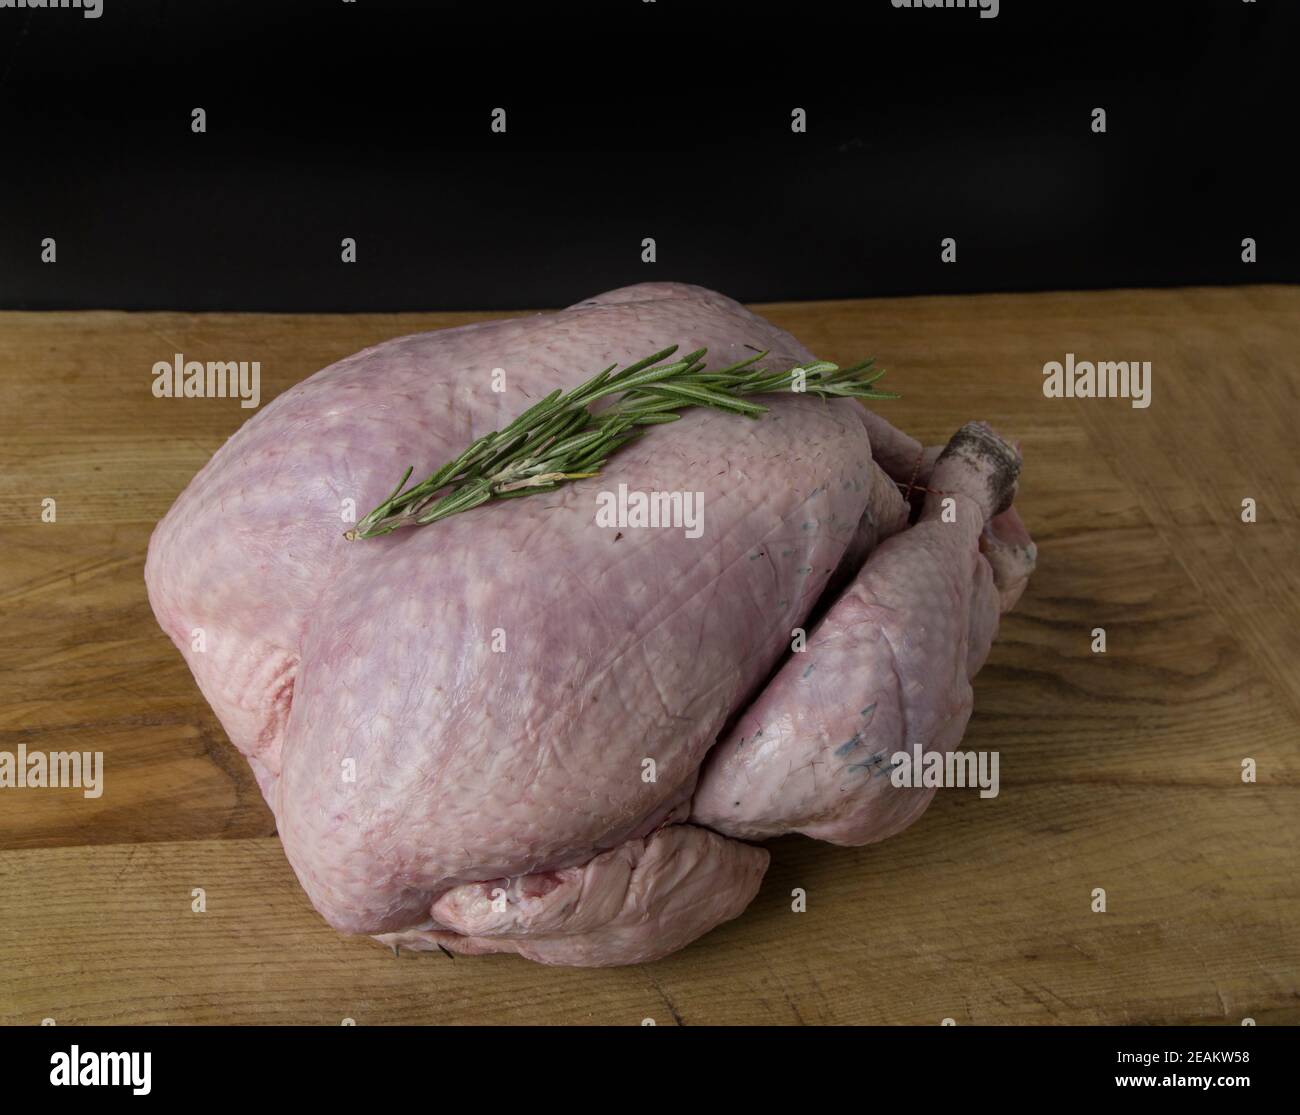 trussed raw turkey photographed on a wooden cutting board with a black background Stock Photo